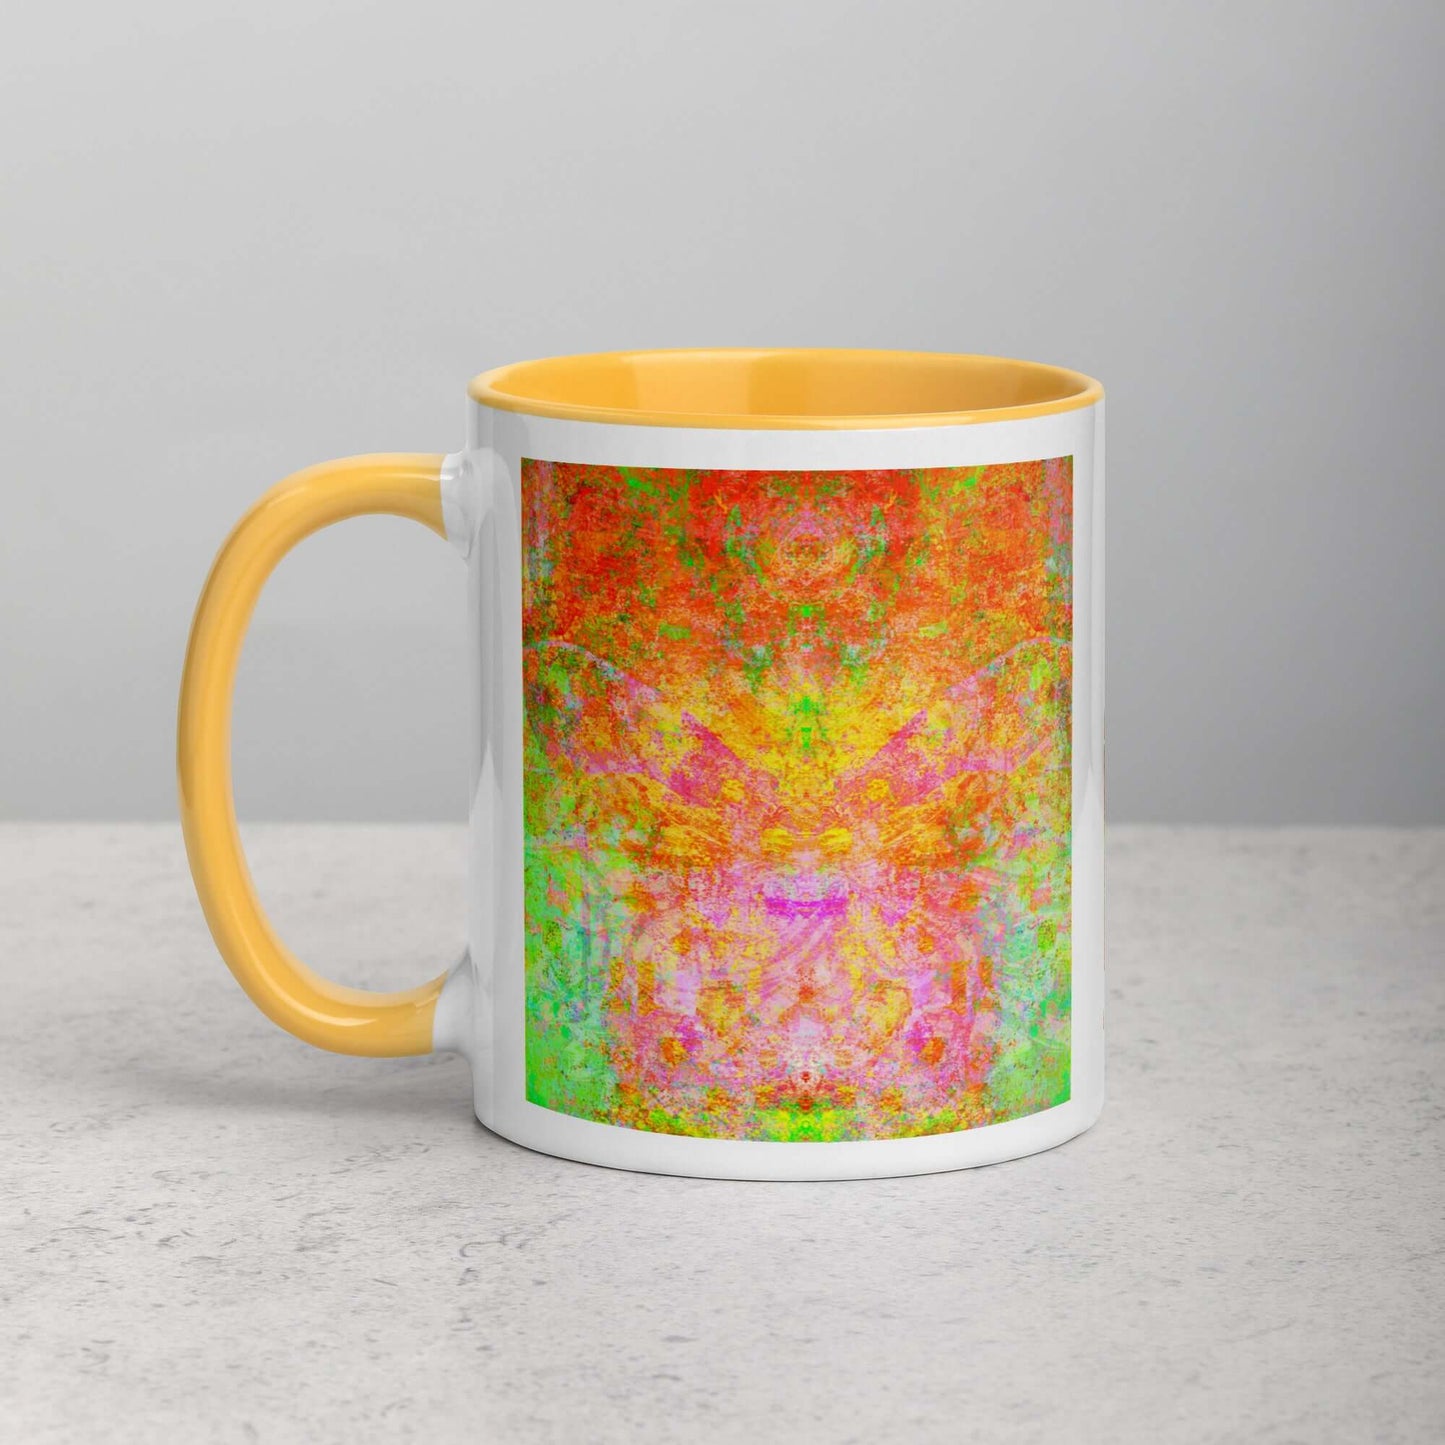 Green and Orange Butterfly Shaped “Firefly” Abstract Art Mug with Golden Yellow Color Inside Left Handed Front View